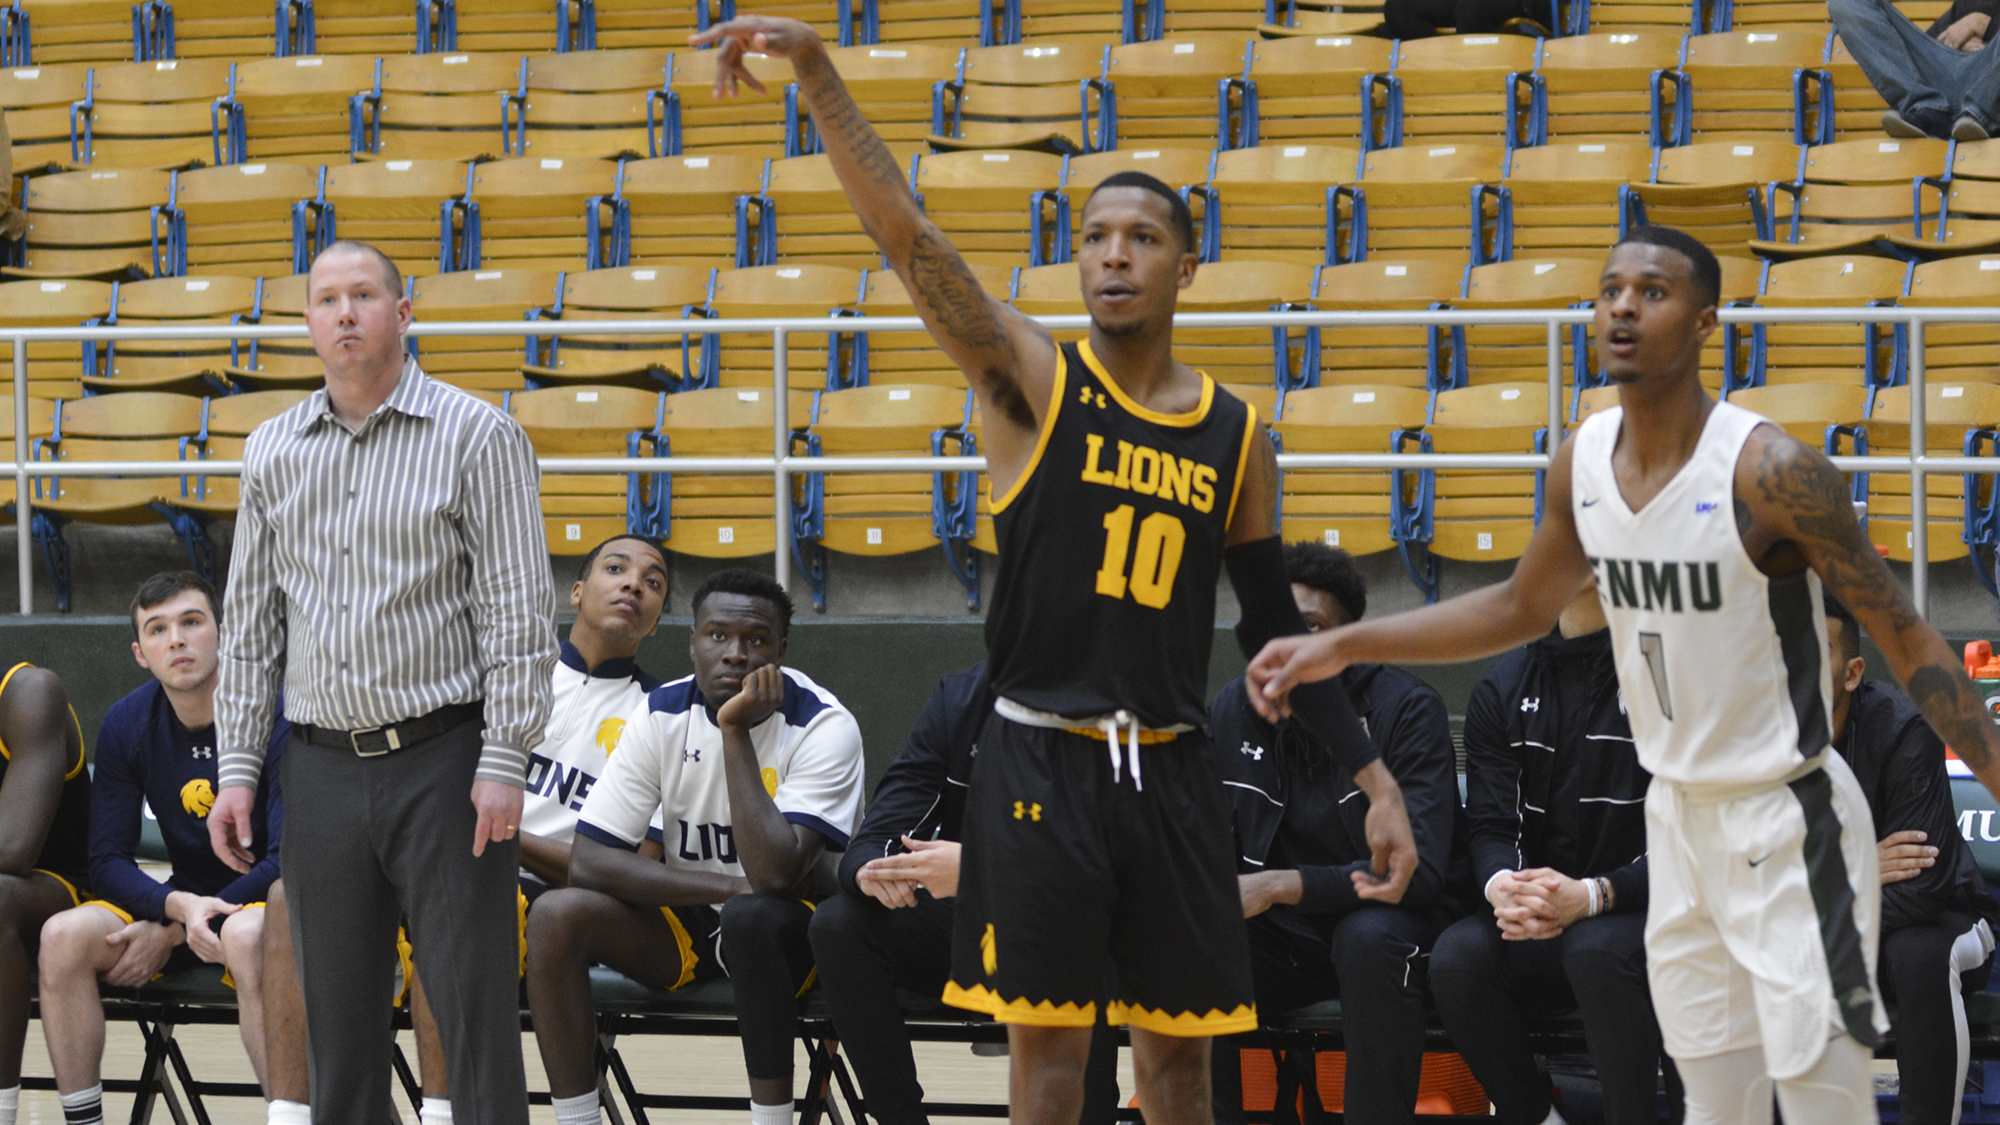 No. 20 Texas A&M University-Commerce Men’s Basketball Overcomes 19-Point First Half Deficit to Defeat ENMU 112-99